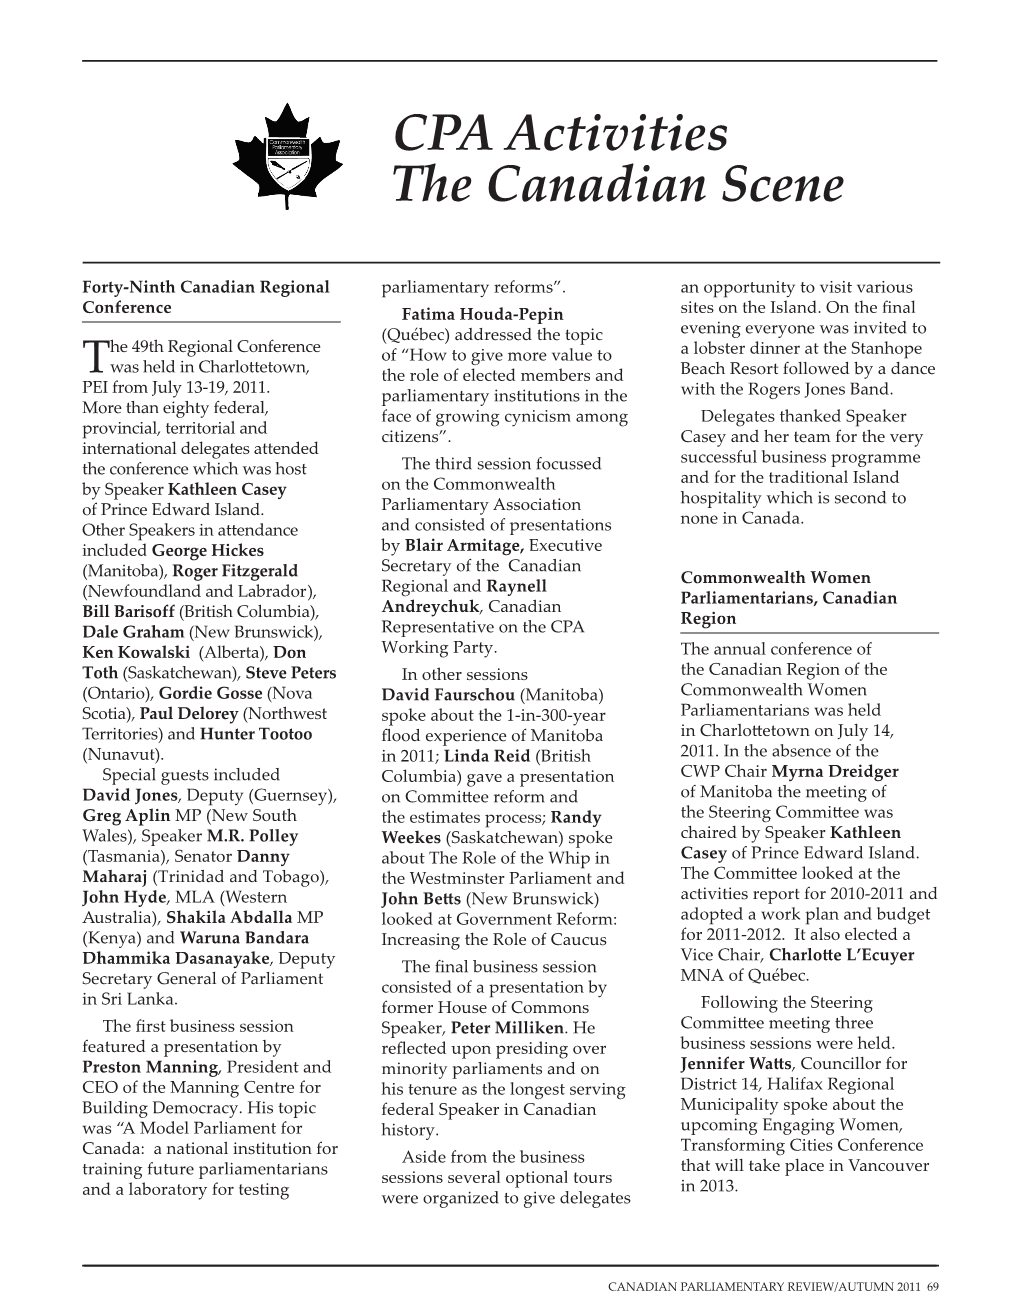 CPA Activities the Canadian Scene